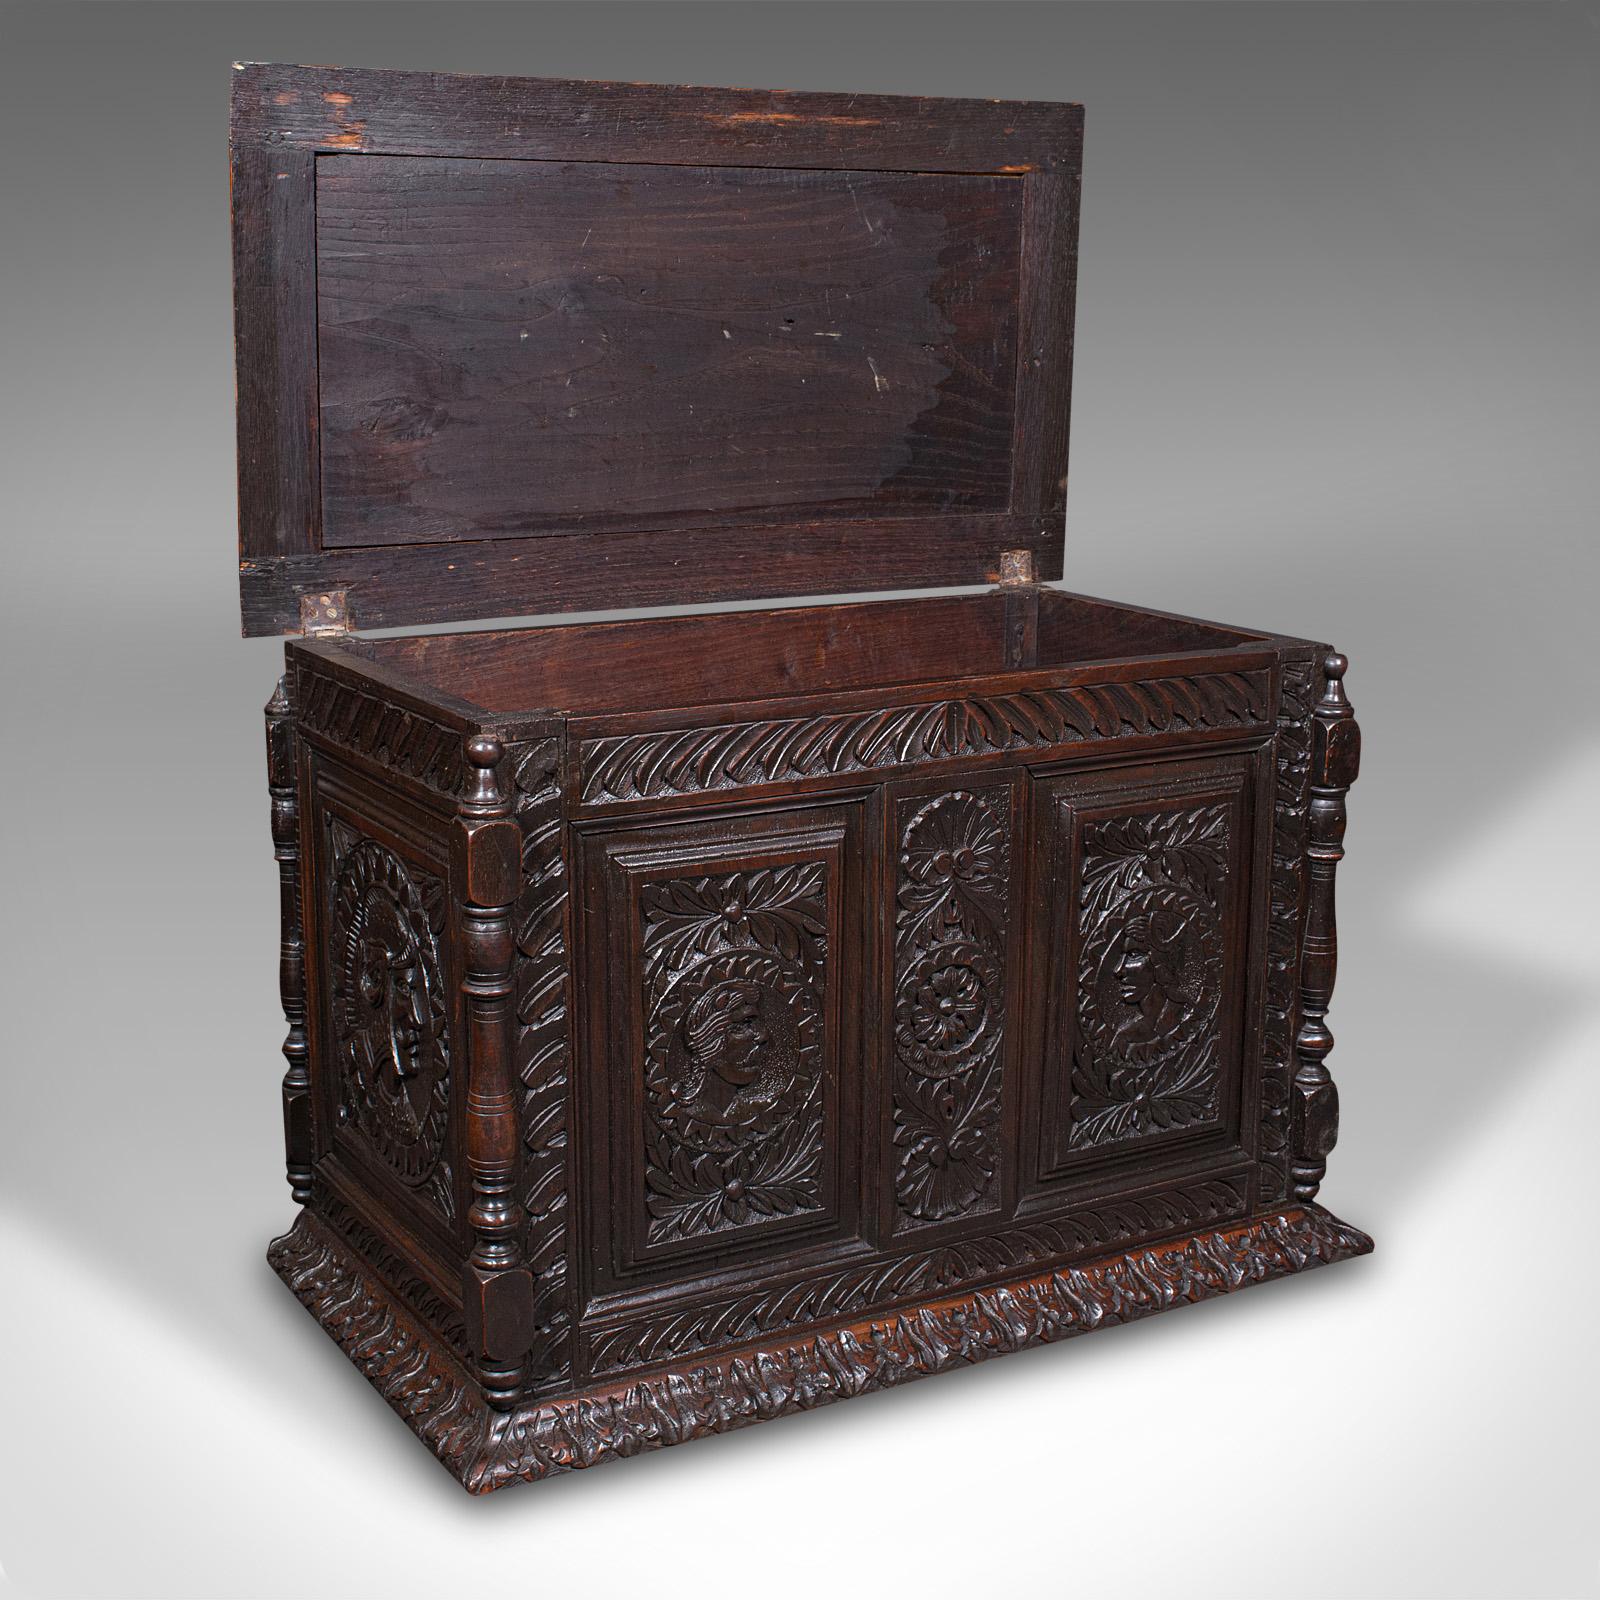 This is a small antique carved coffer. An English, oak blanket box with Gothic revival taste, dating to the Victorian period, circa 1880.

Exuberant display of carved craftsmanship, with appealing proportion
Displaying a desirable aged patina and in